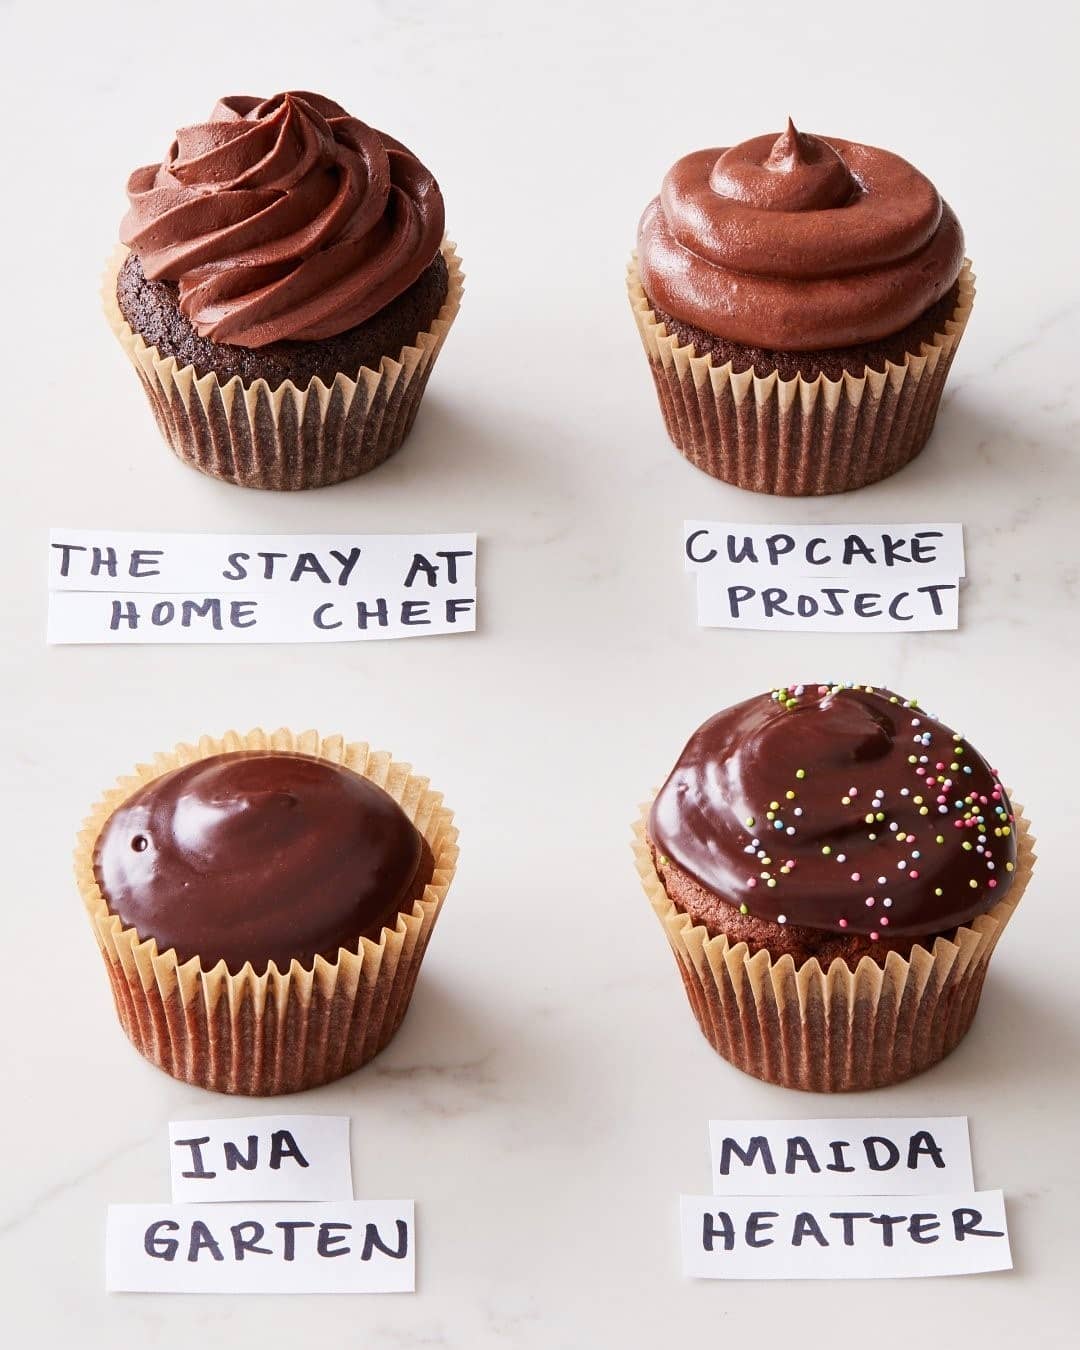 Gallery image for https://www.thekitchn.com/chocolate-cupcake-recipe-reviews-23123993